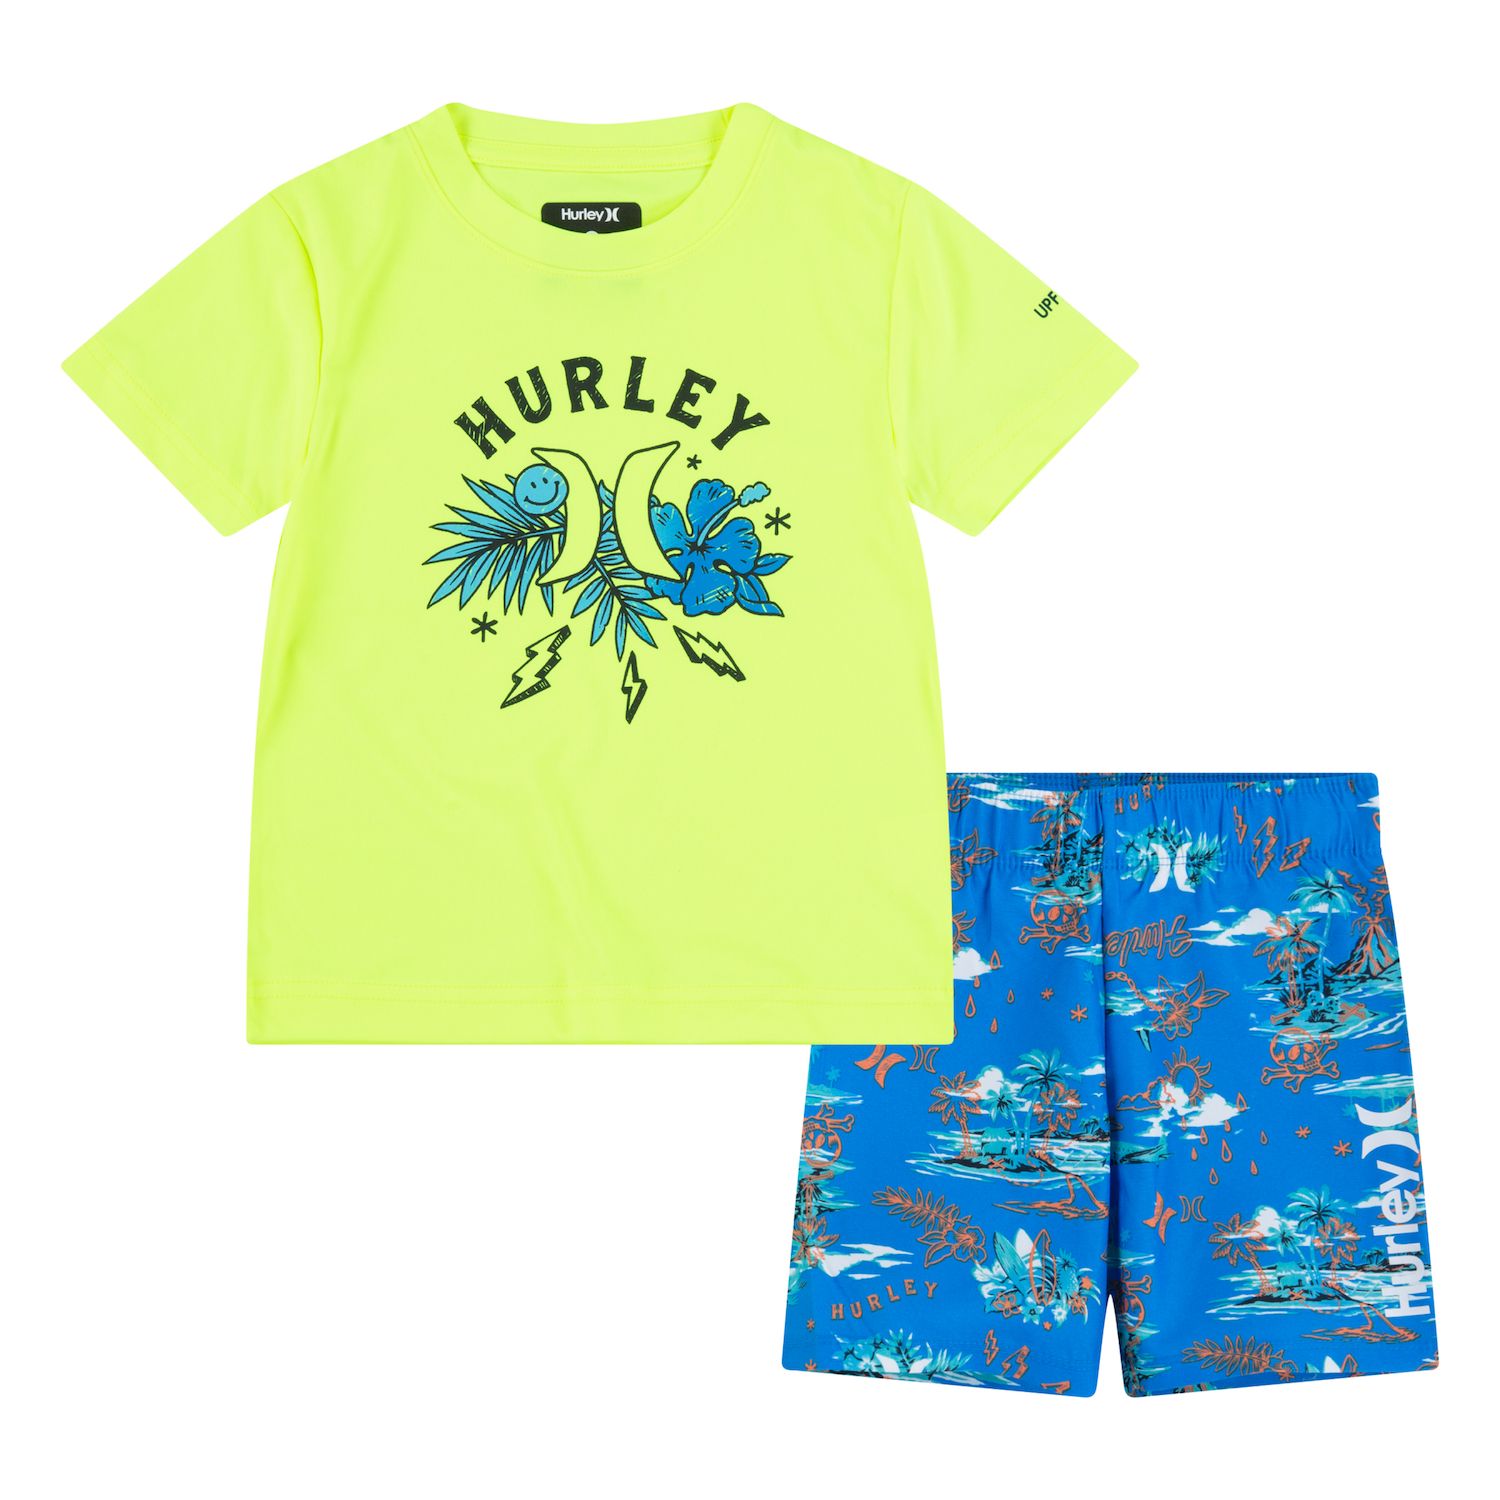 Image for Hurley Toddler Boys Short Sleeve Graphic Tee & Tropical Shorts Swim Set at Kohl's.